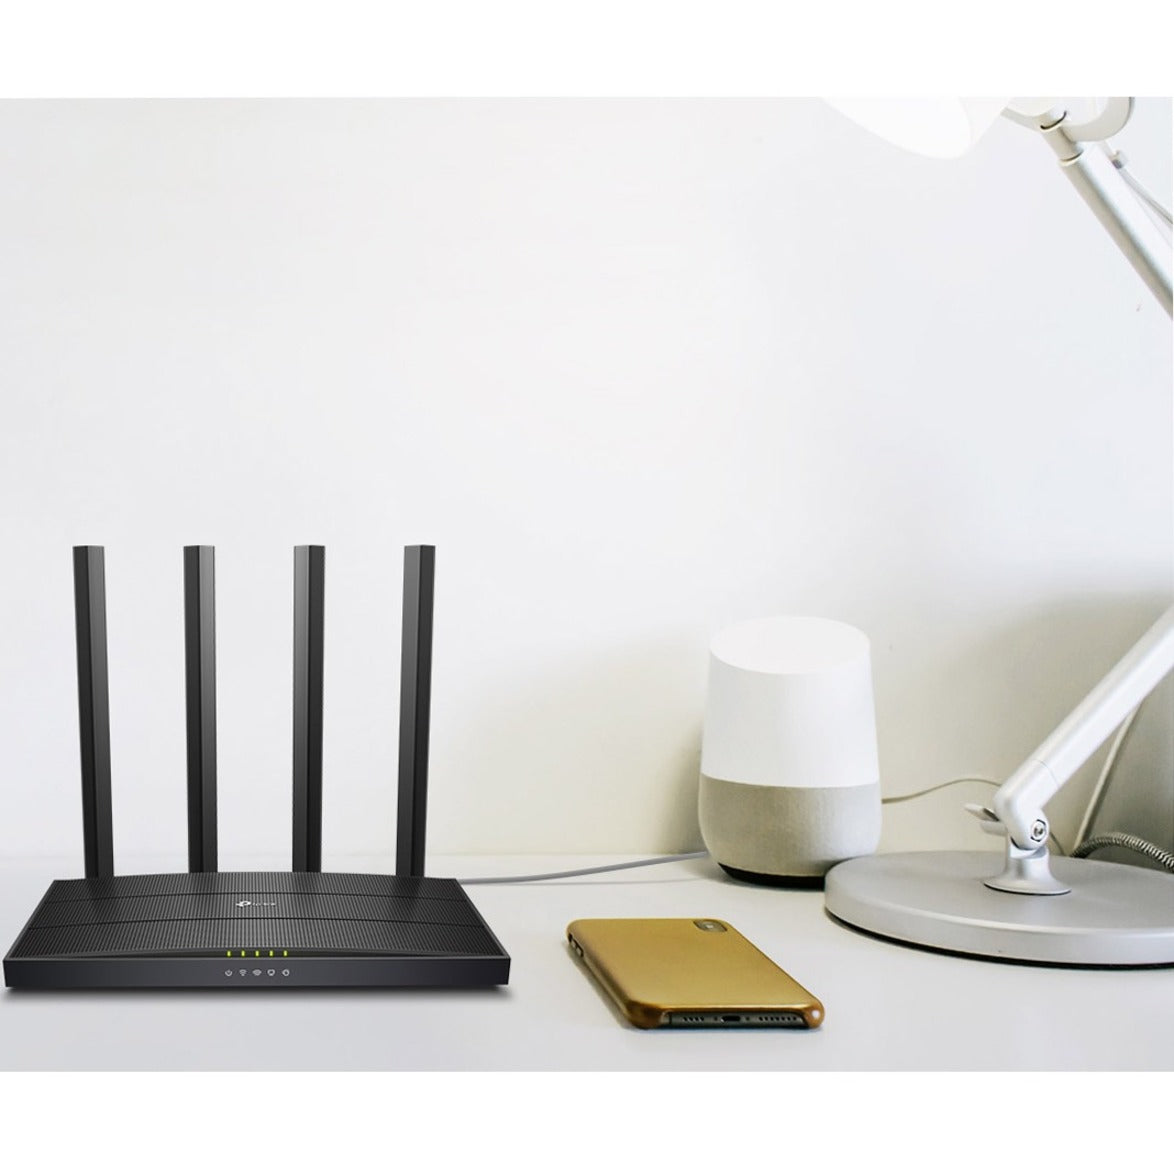 TP-Link ARCHER A6_V3 AC1200 Wireless MU-MIMO Gigabit Router, Dual Band, 2 Year Warranty